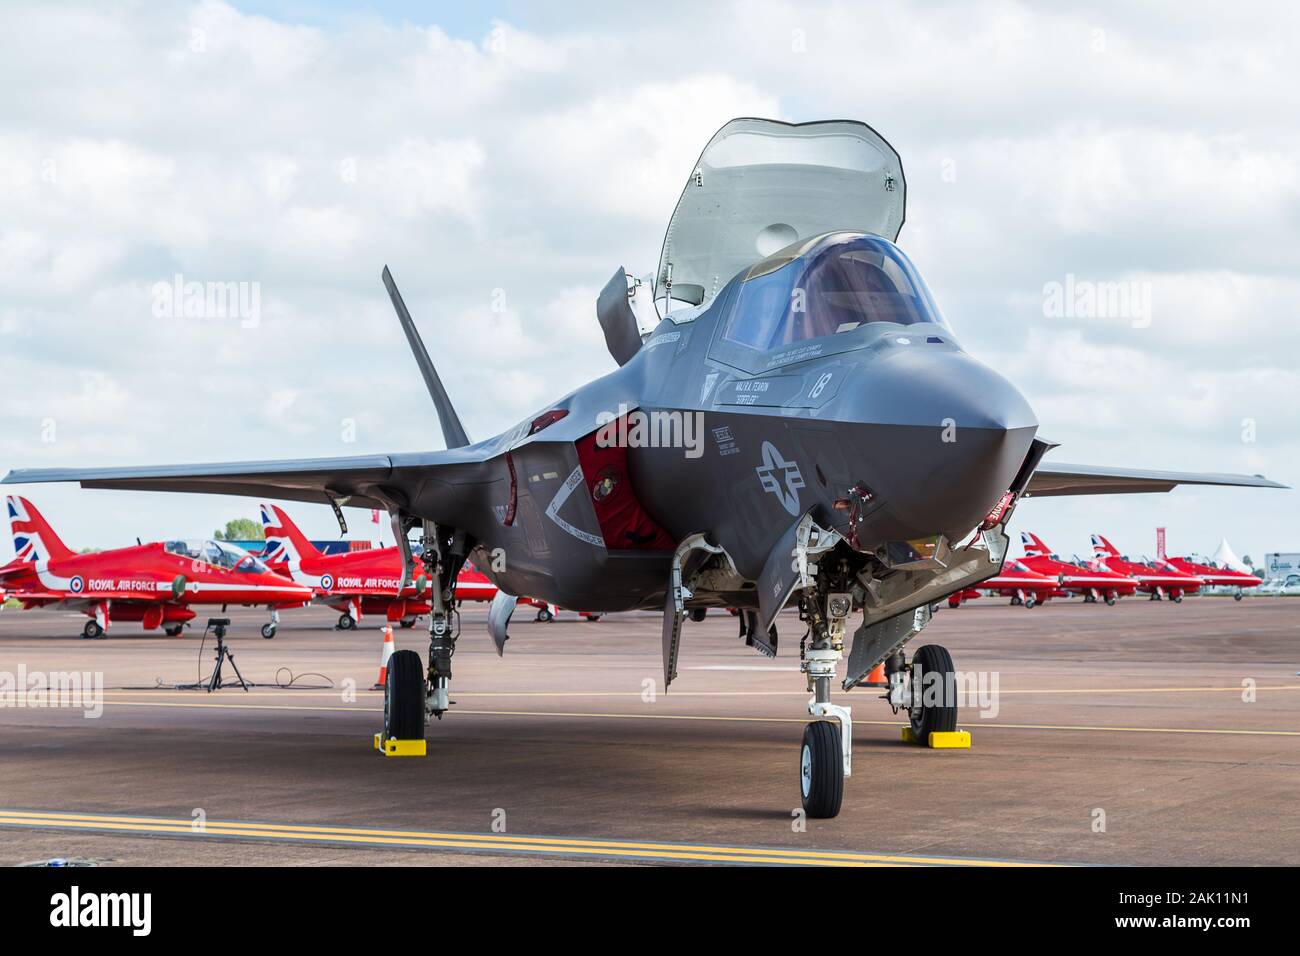 F-35B stealth fighter in front of the Red Arrows in July 2016 seen at the Royal International Air Tattoo, Gloucestershire in England. Stock Photo